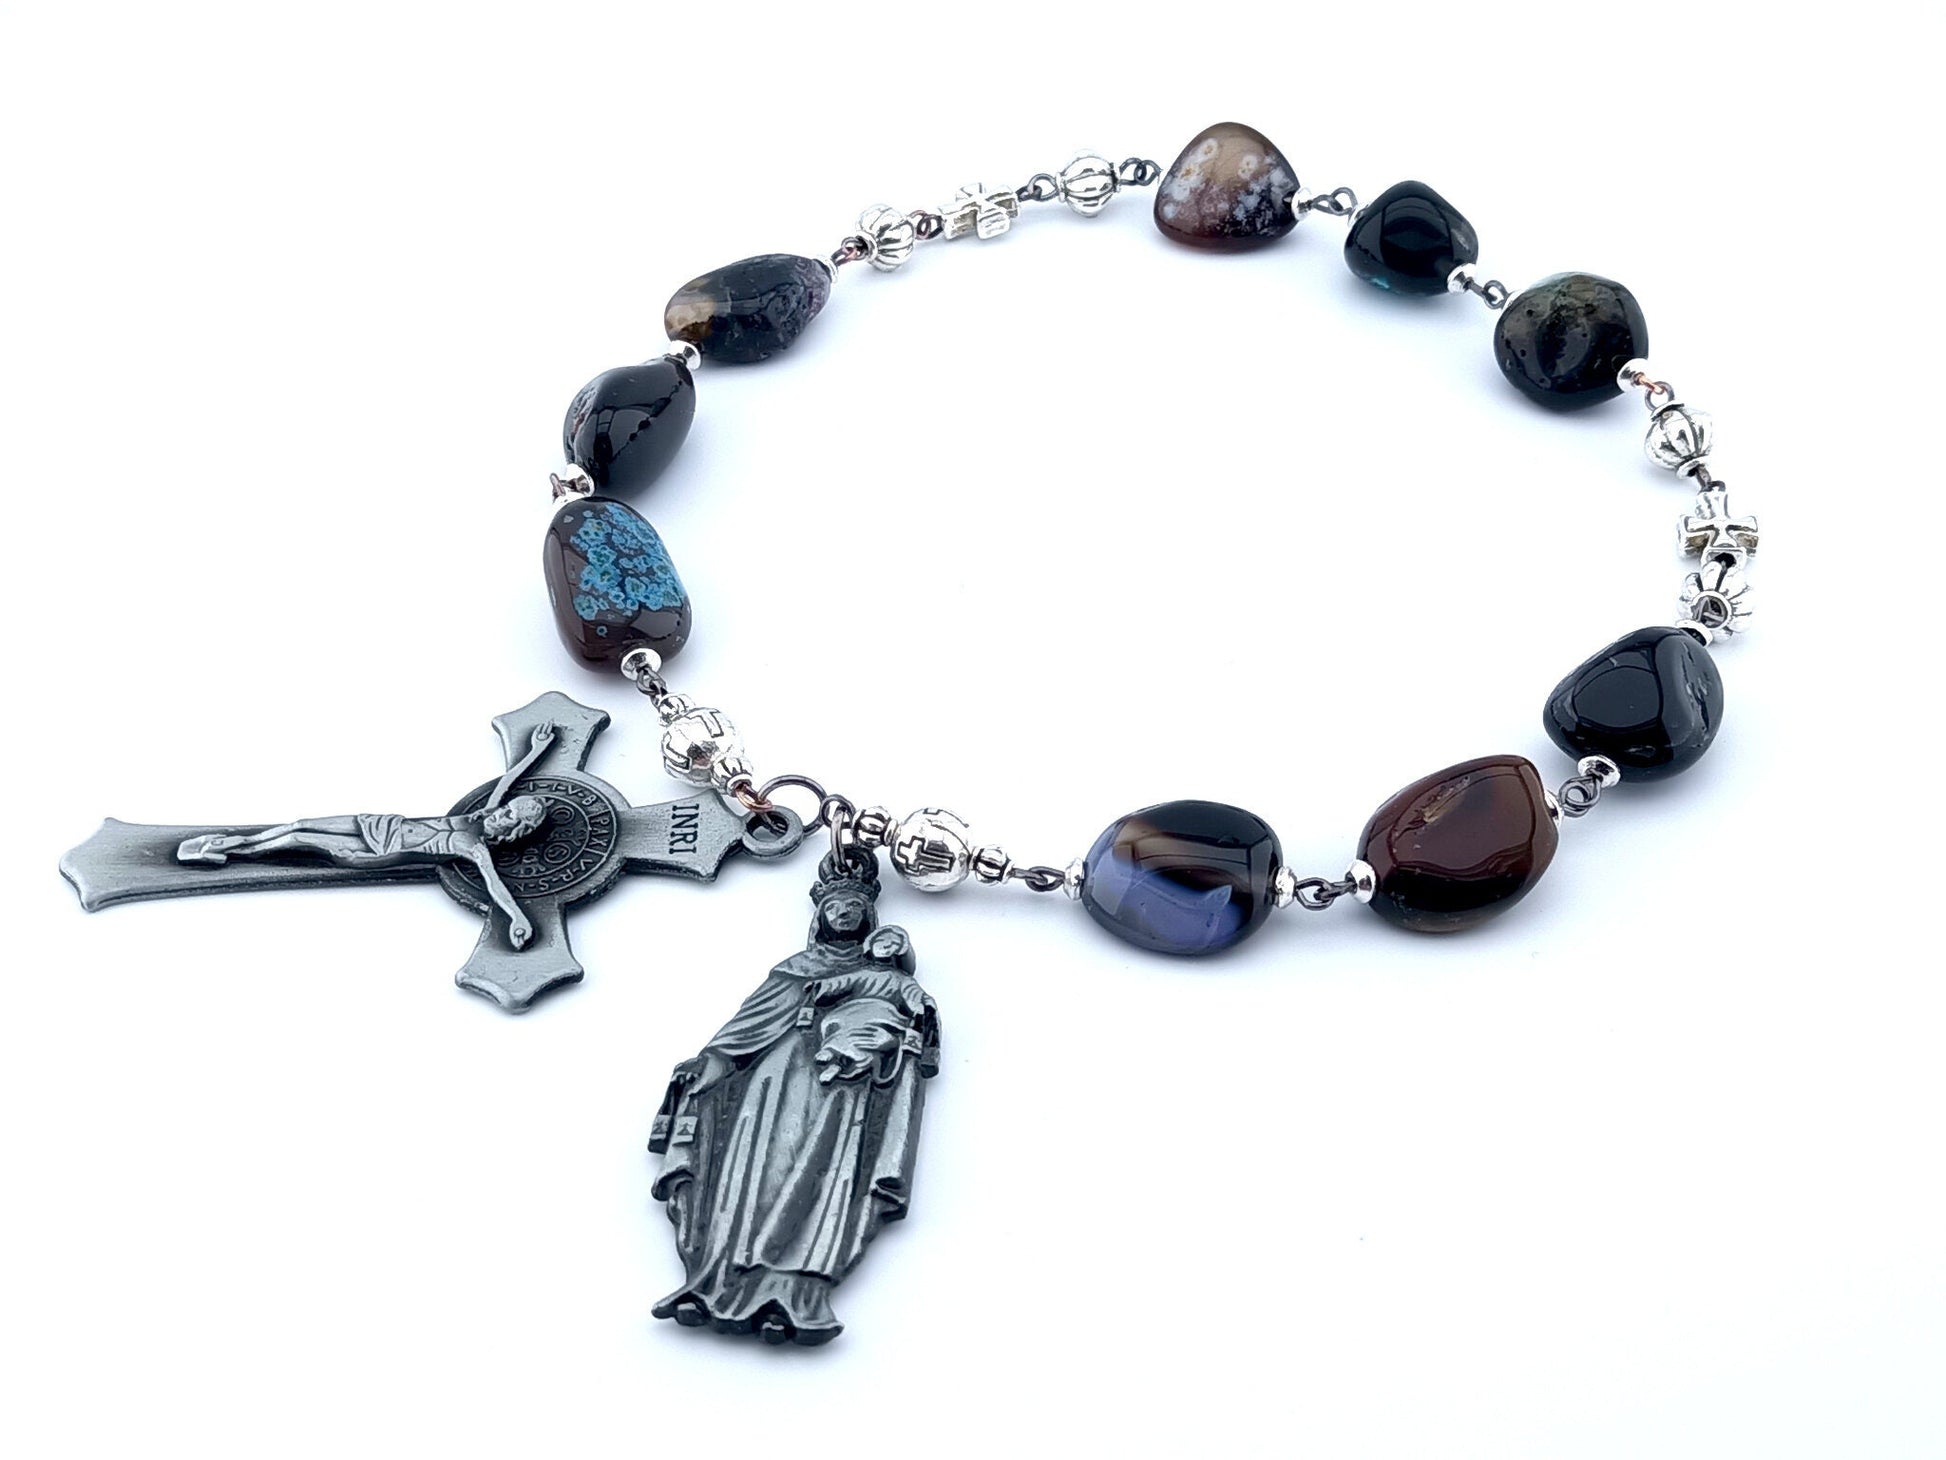 Our Lady of Mount Carmel unique rosary beads prayer chaplet with agate nugget beads, pewter crucifix and Our Lady end medal.